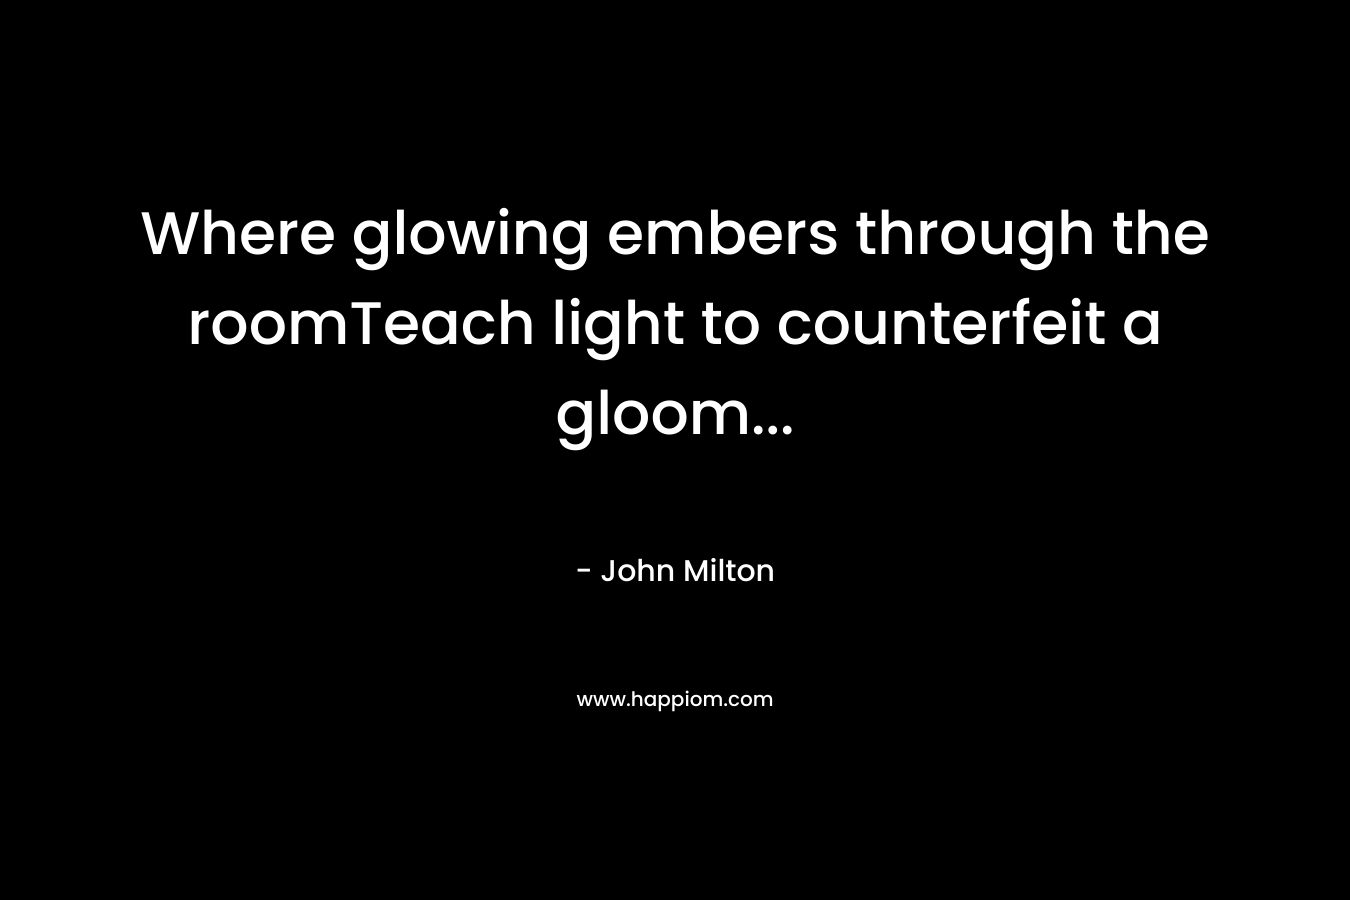 Where glowing embers through the roomTeach light to counterfeit a gloom...